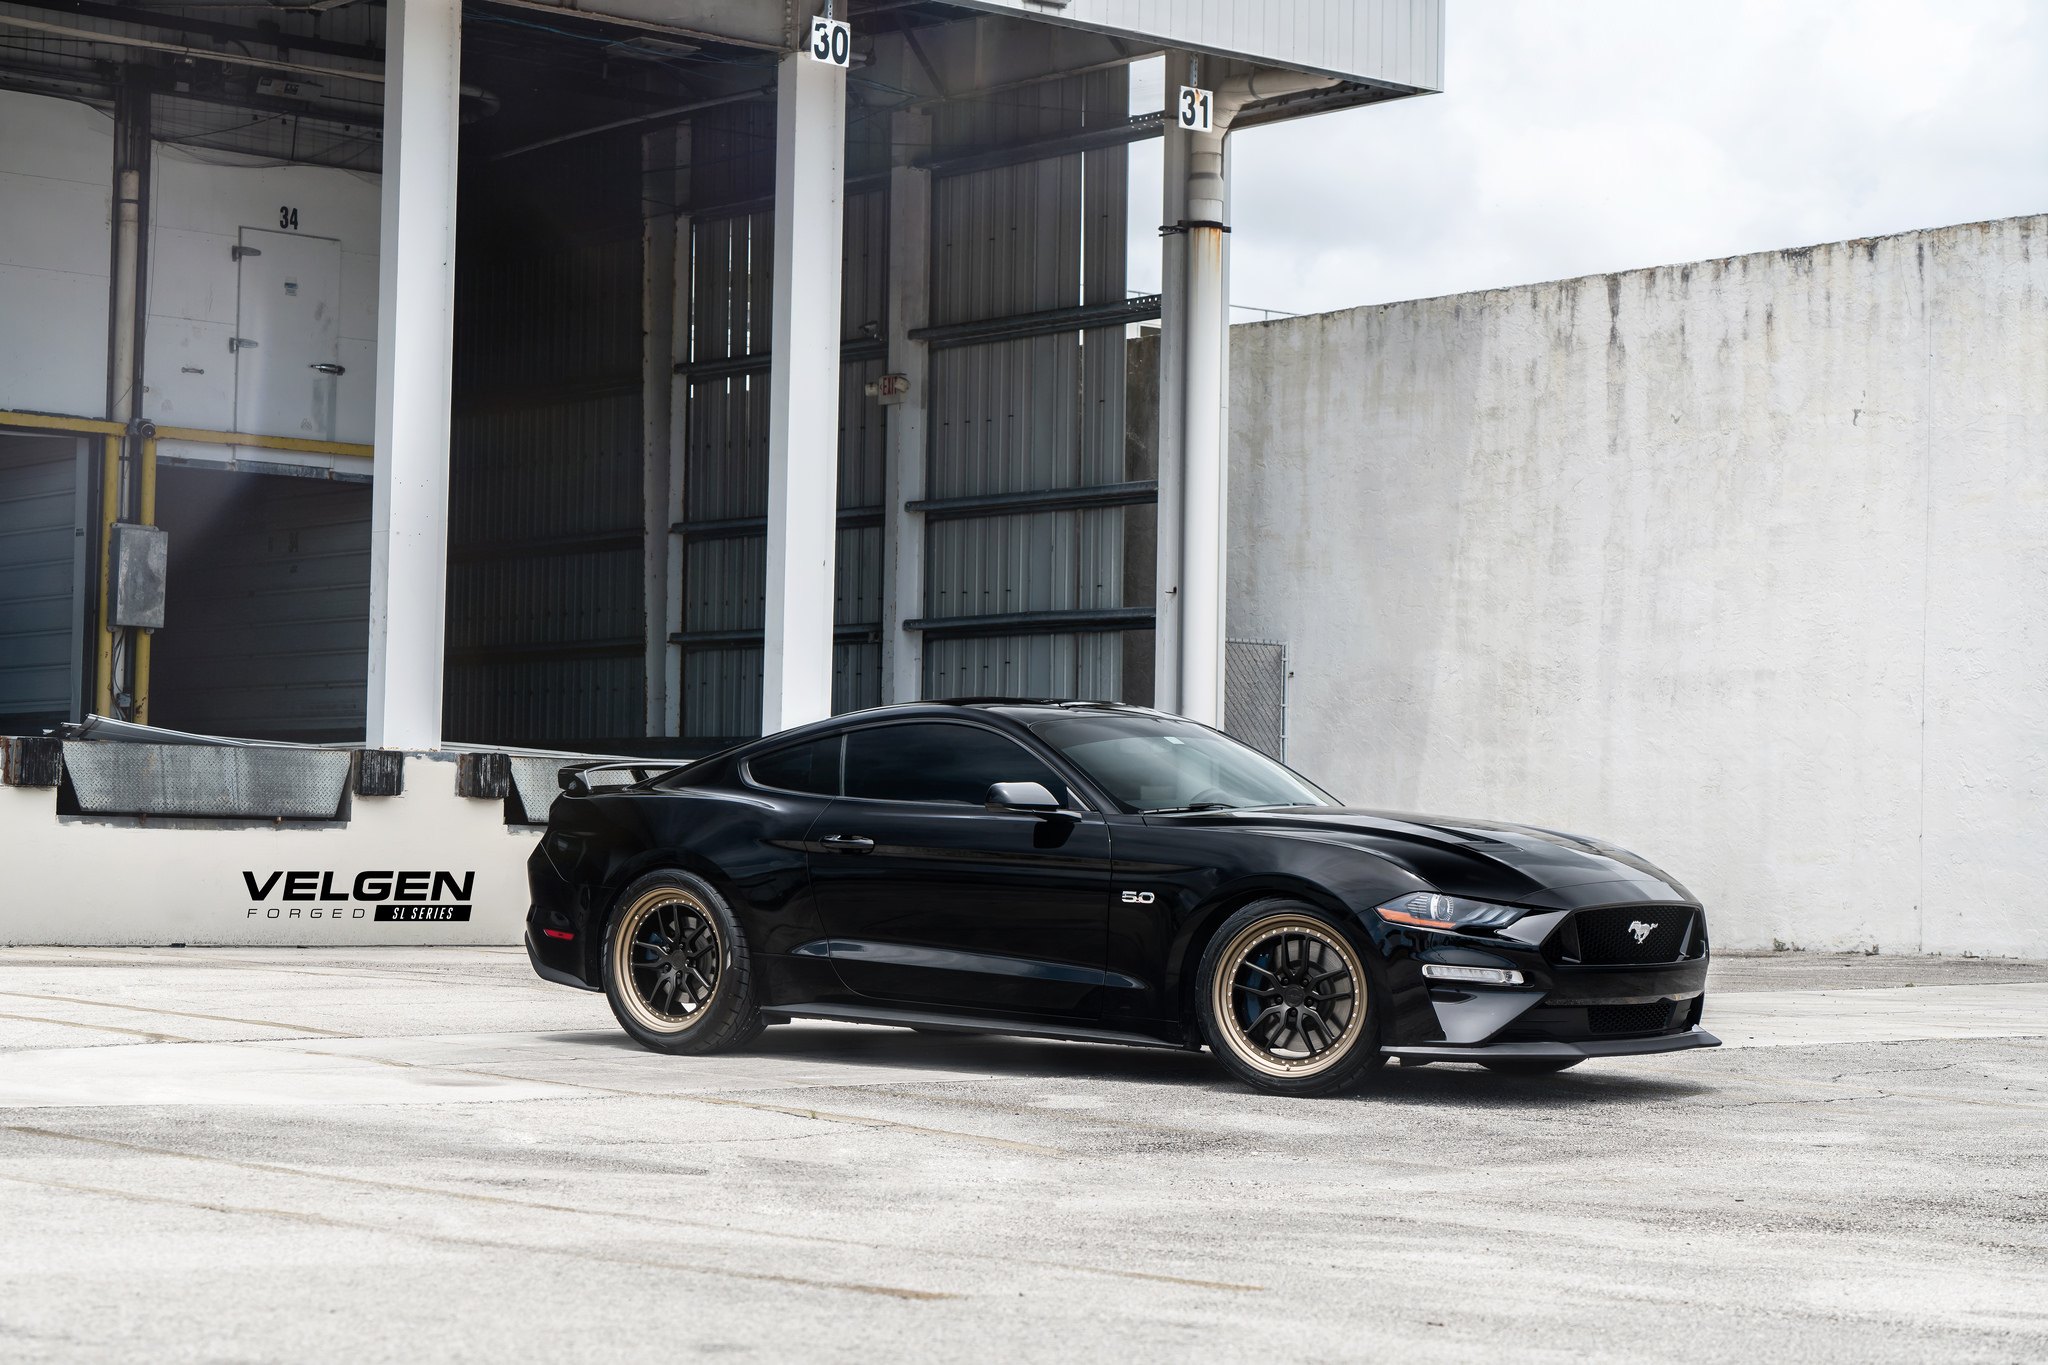 Aftermarket Side Skirts on Black Ford Mustang - Photo by Velgen Wheels